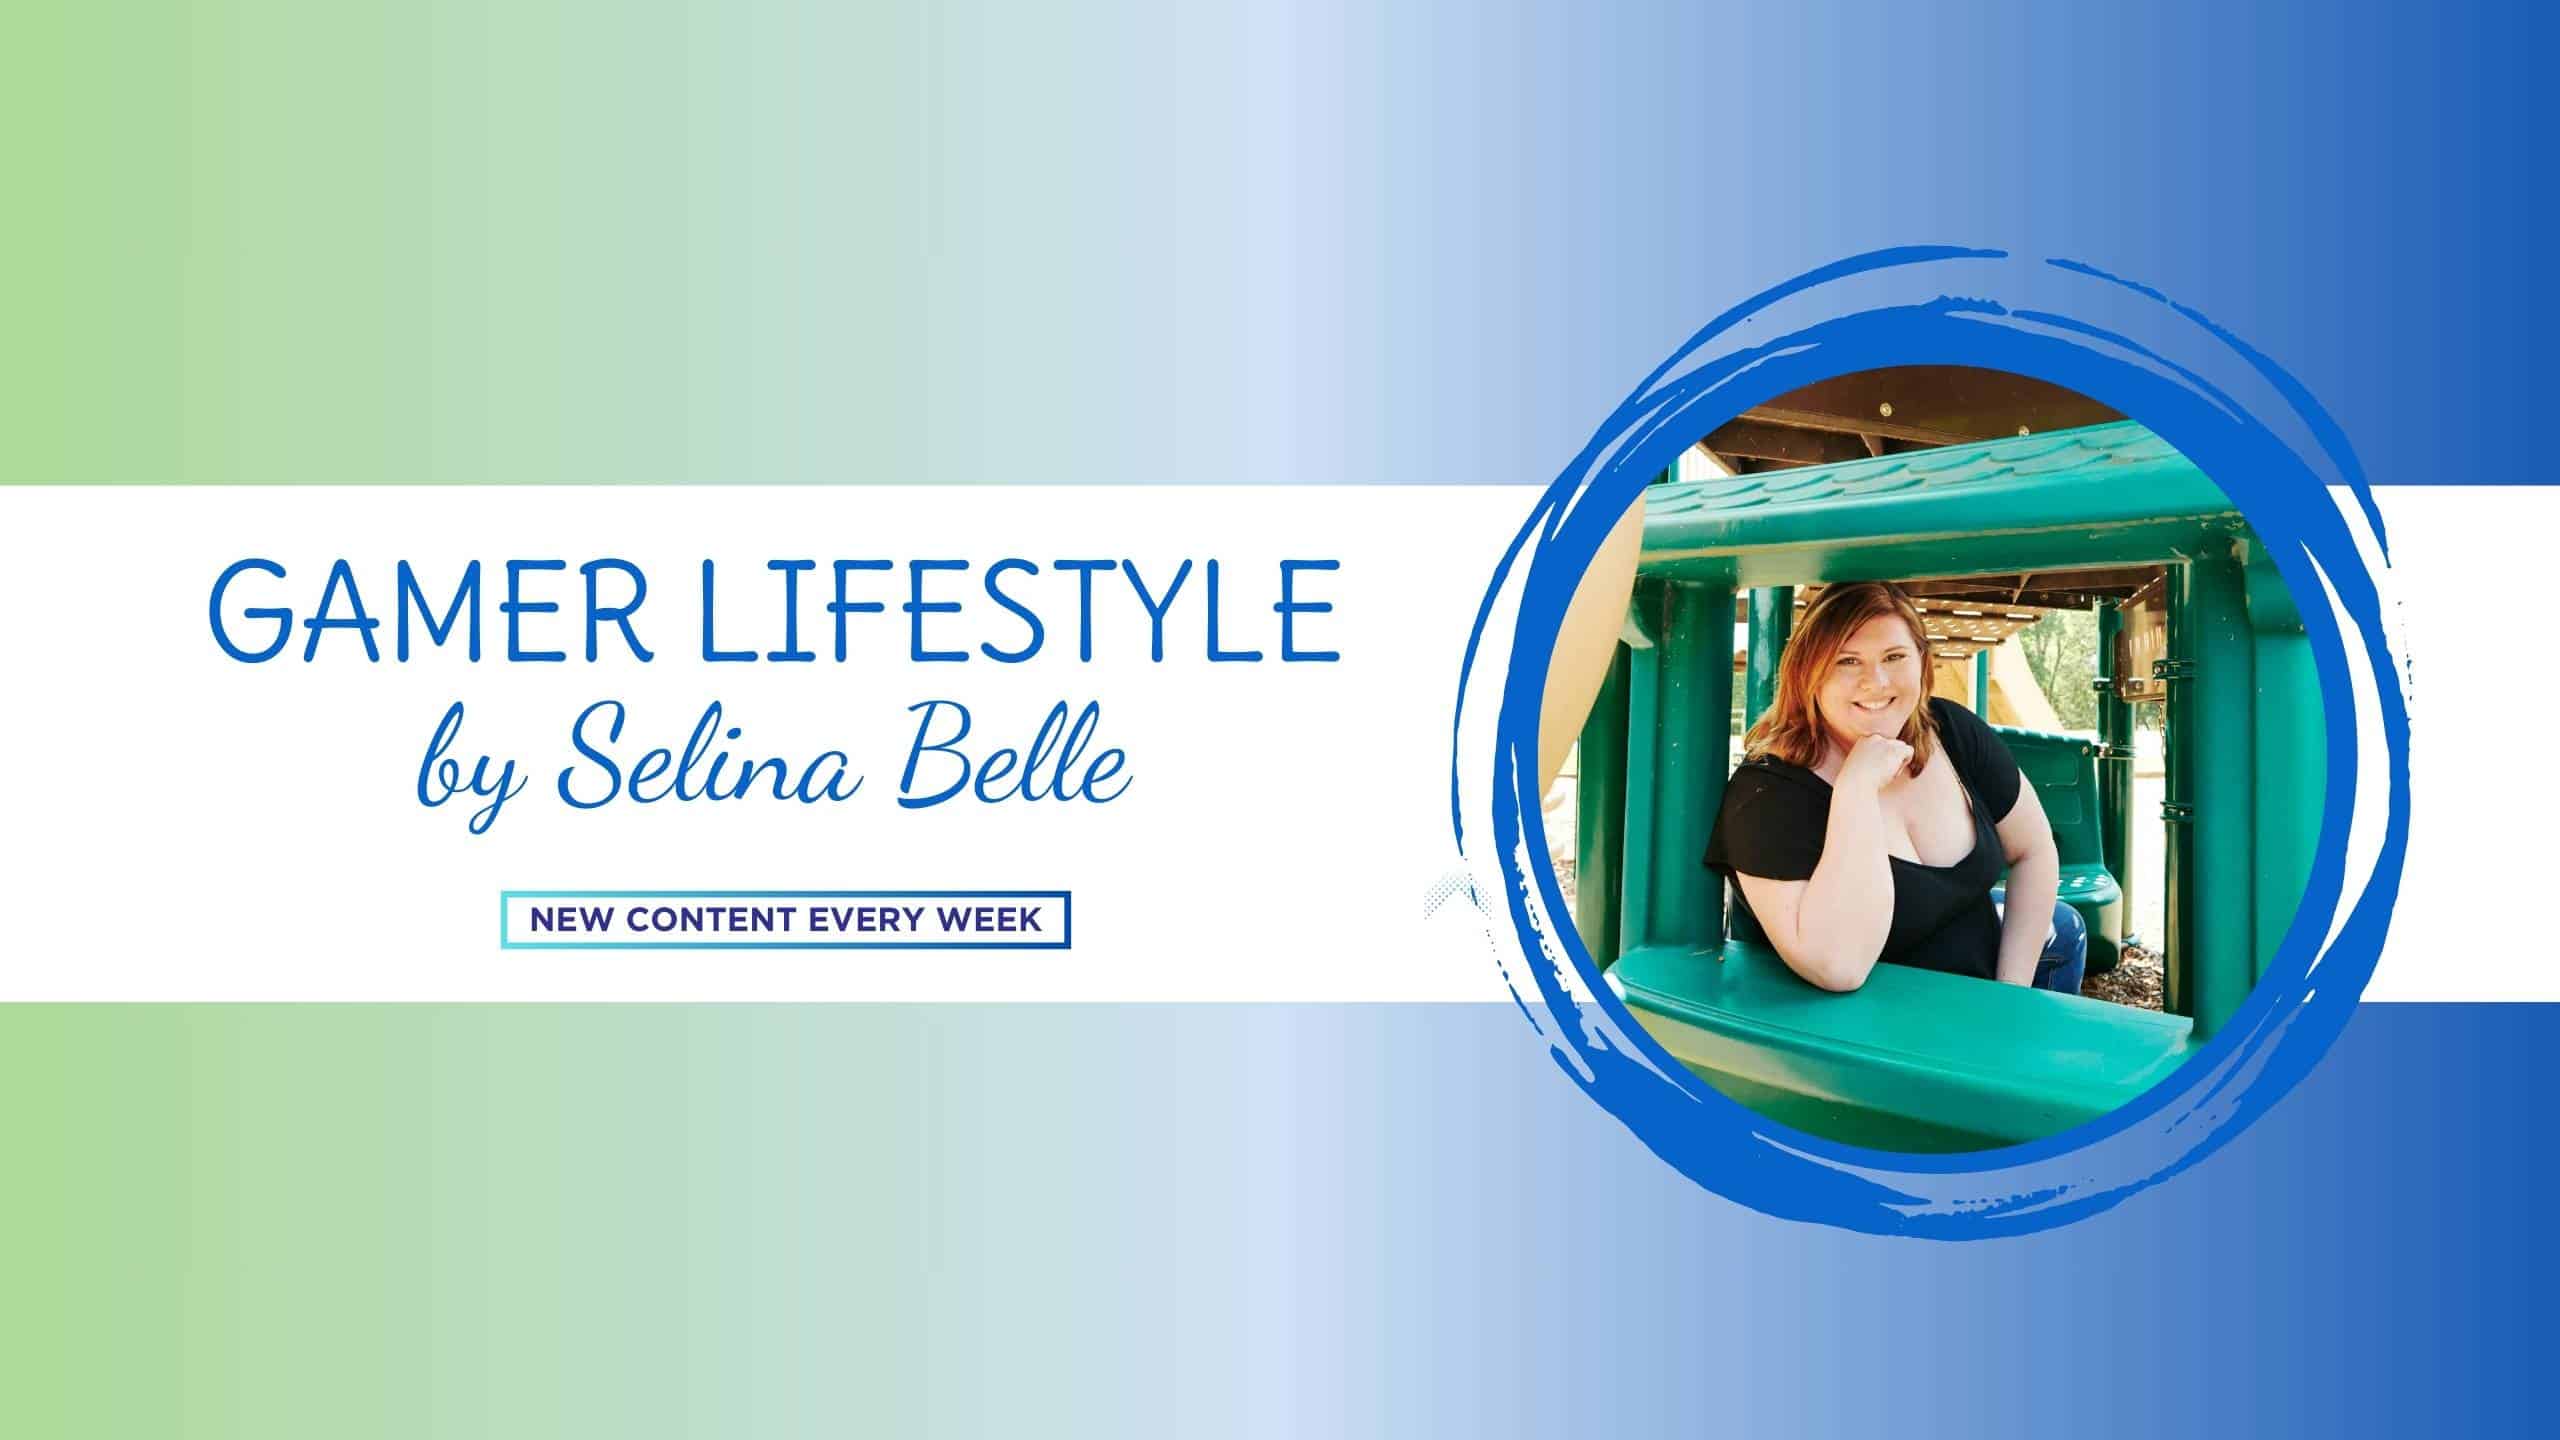 Introducing Gamer Lifestyle By Selina Belle